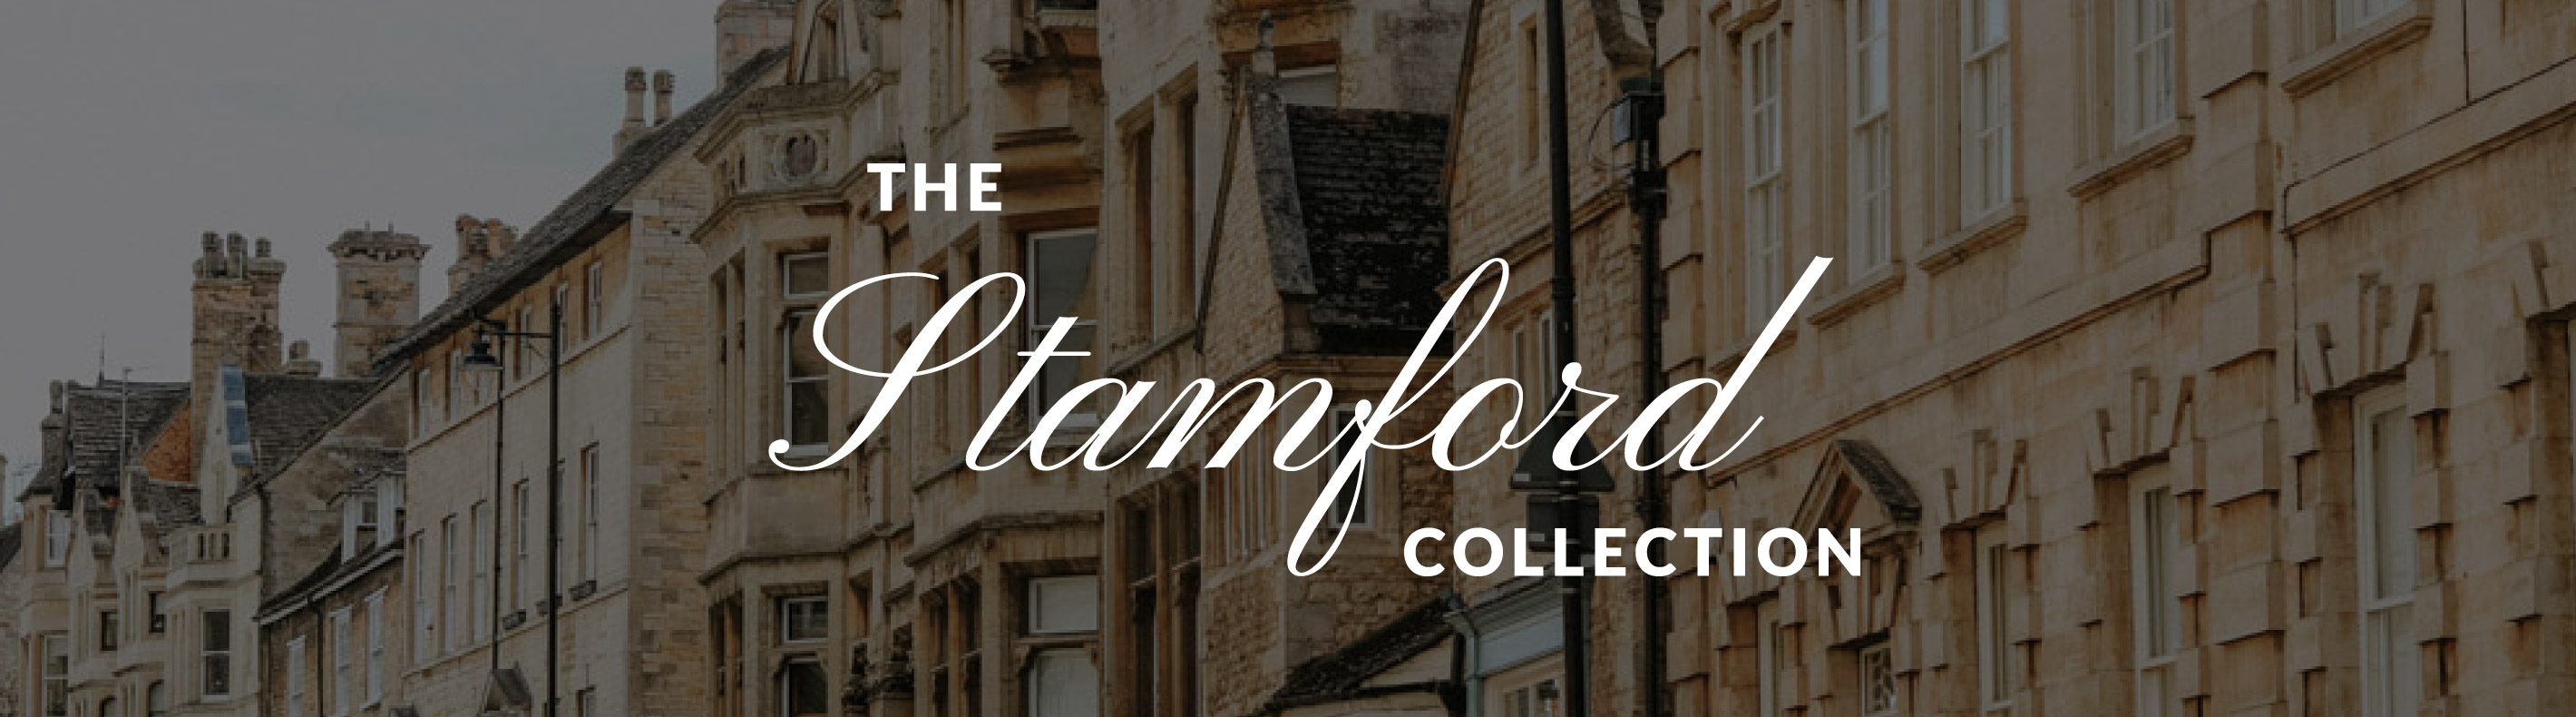 The Stamford Collection